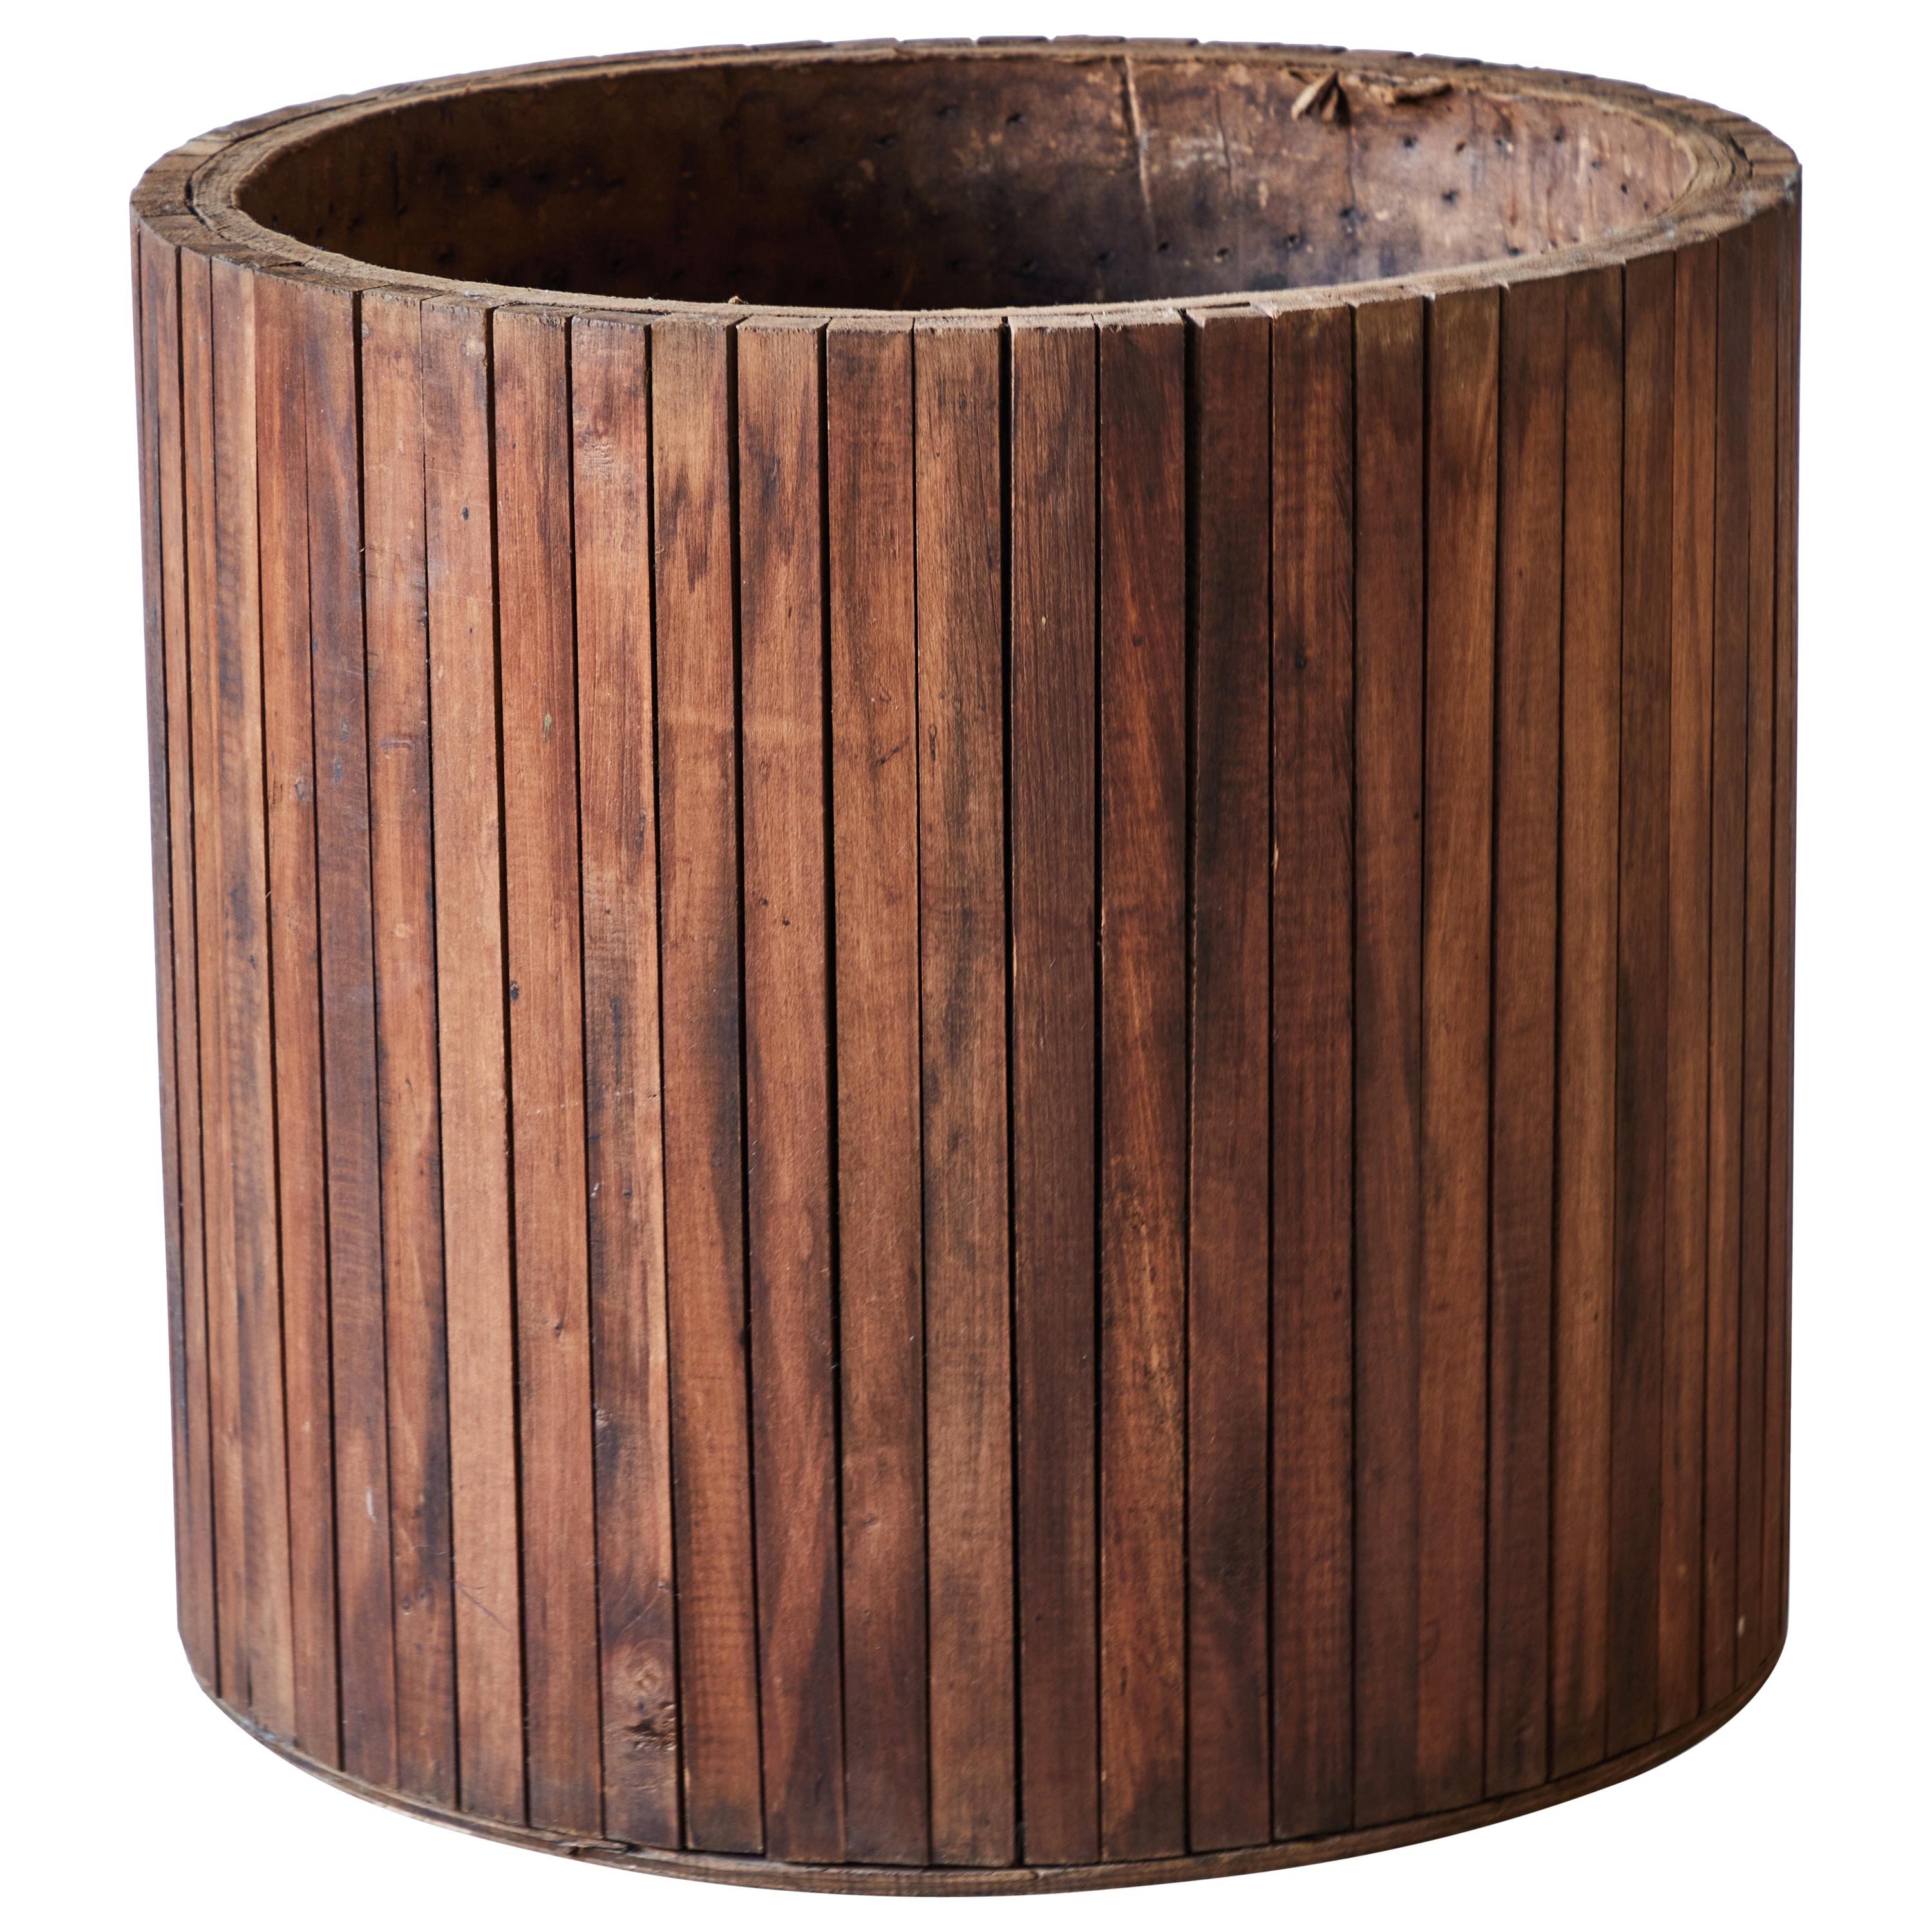 Rustic Wooden Faceted Planter